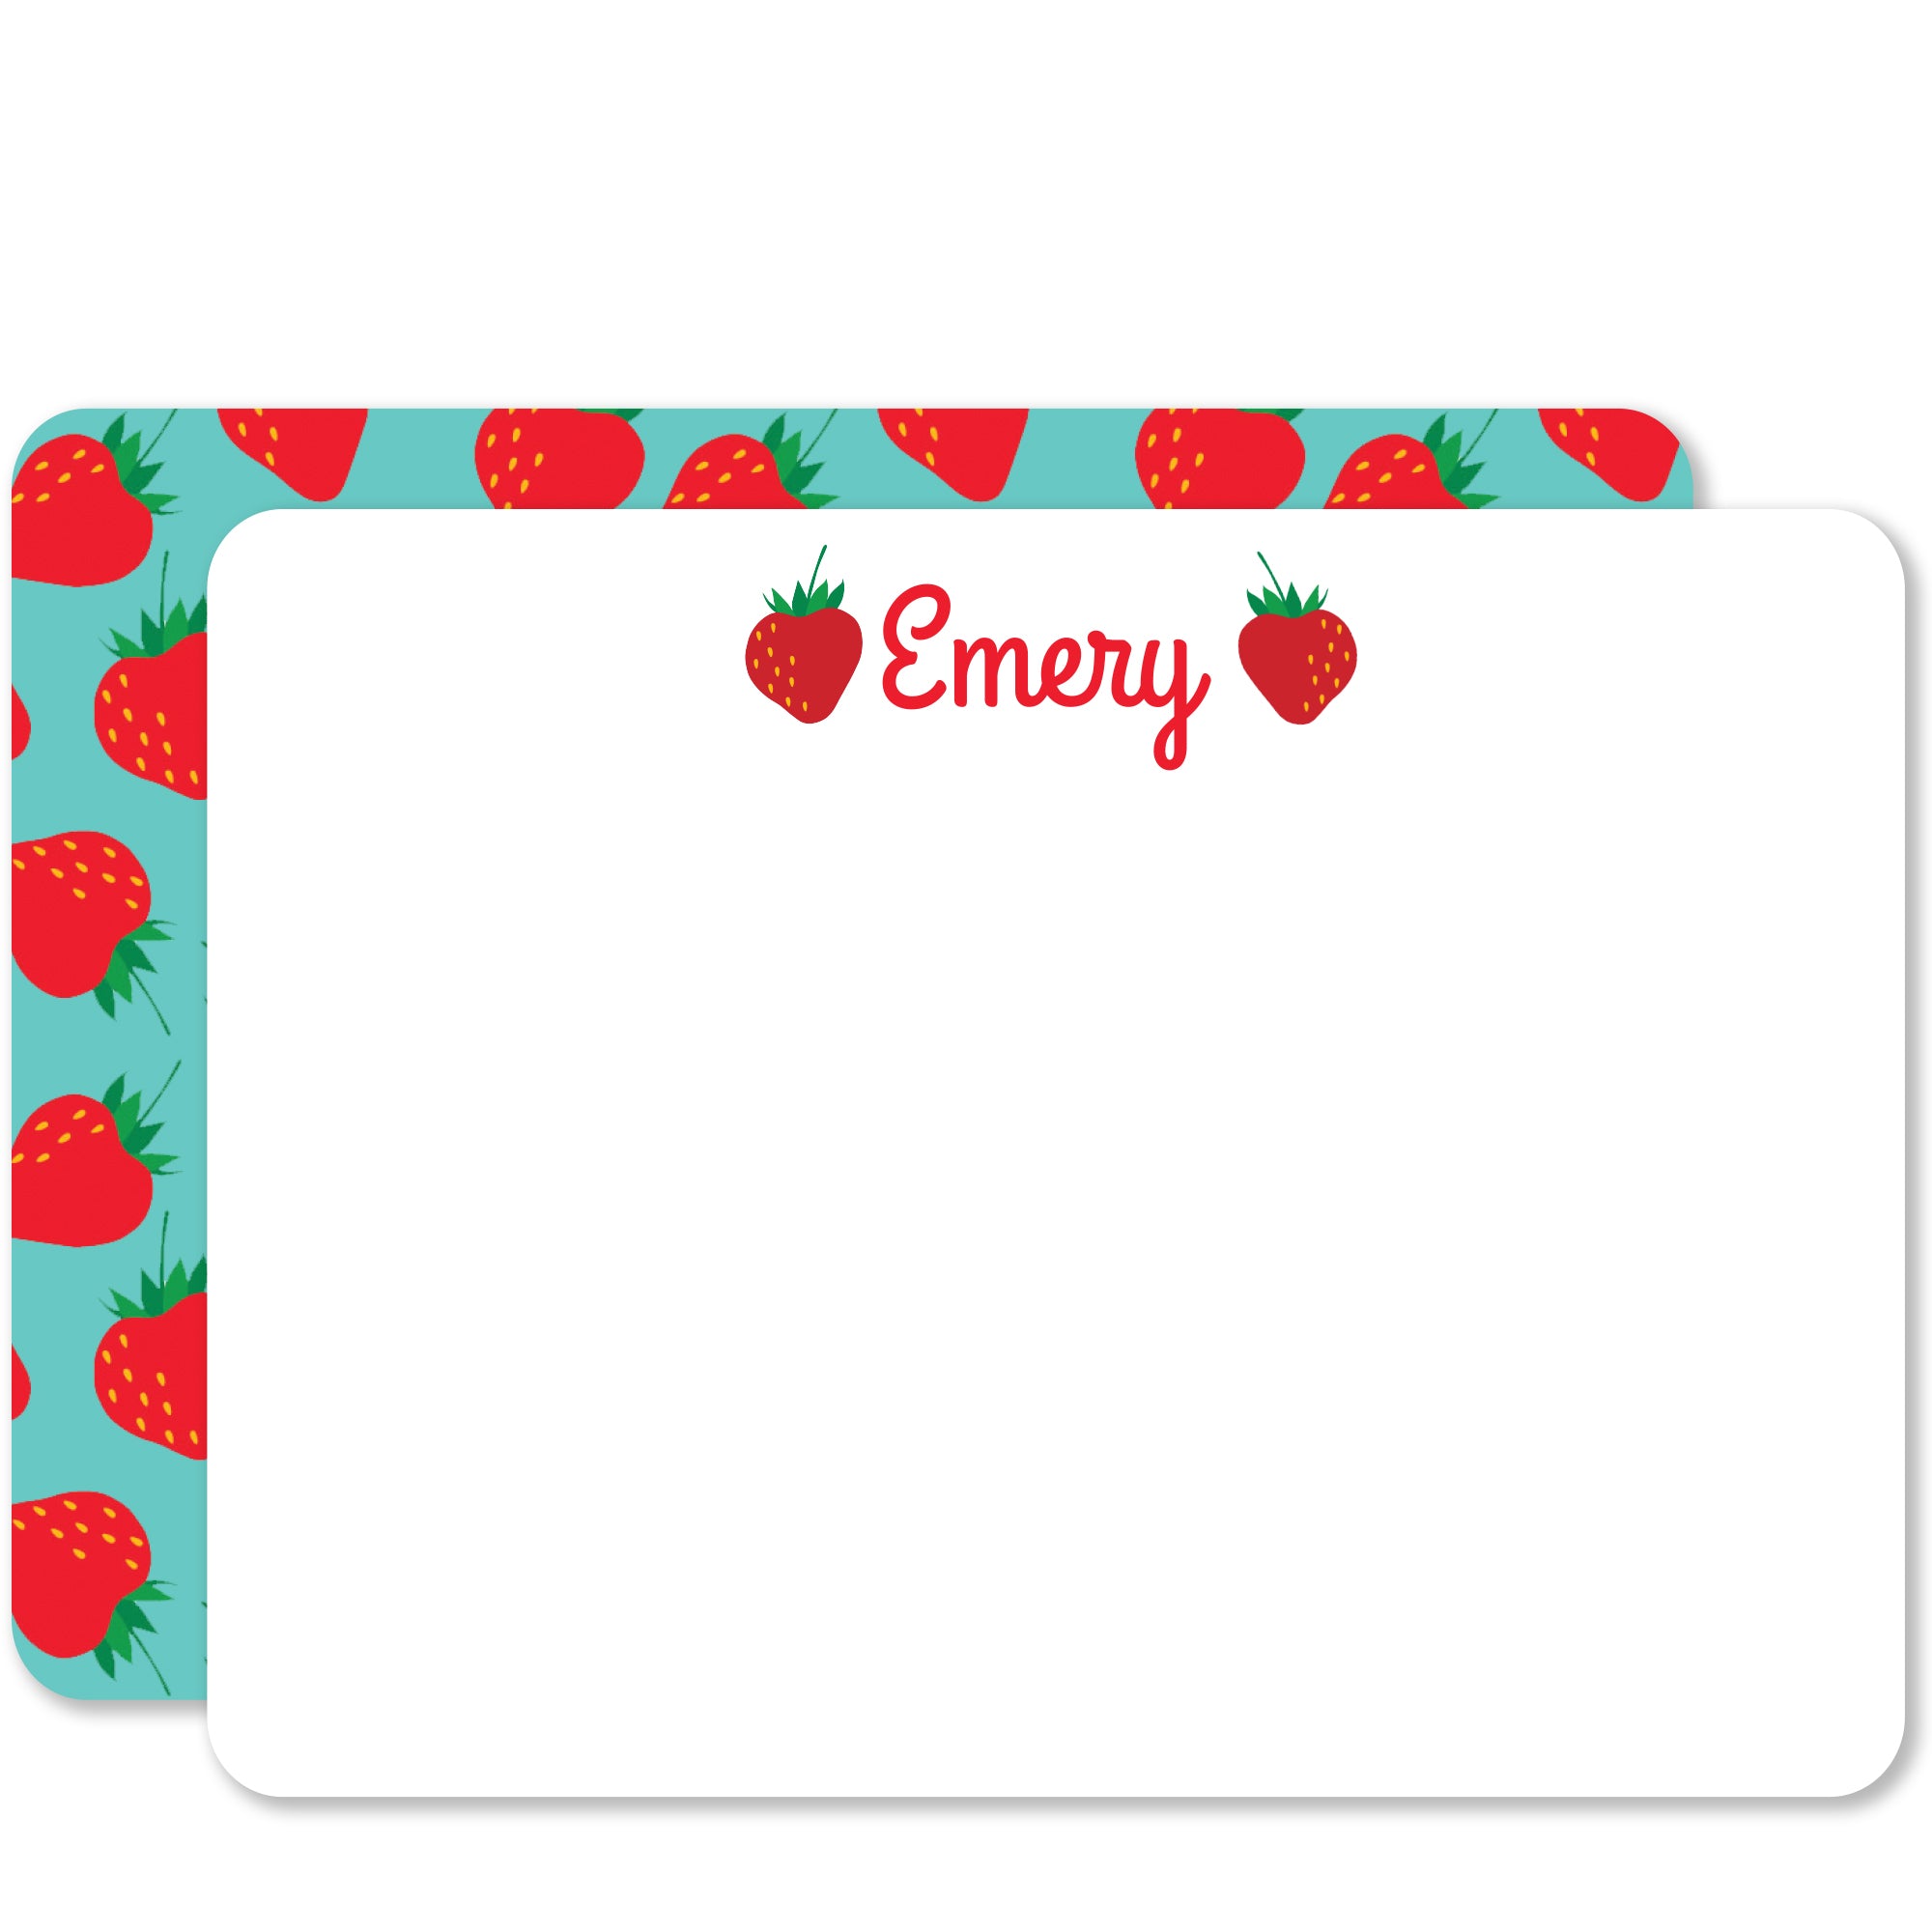 Strawberry stationery - thank you note cards to match a strawberry party theme, ultra heavy cardstock with 2 sided printing, comes with white envelopes